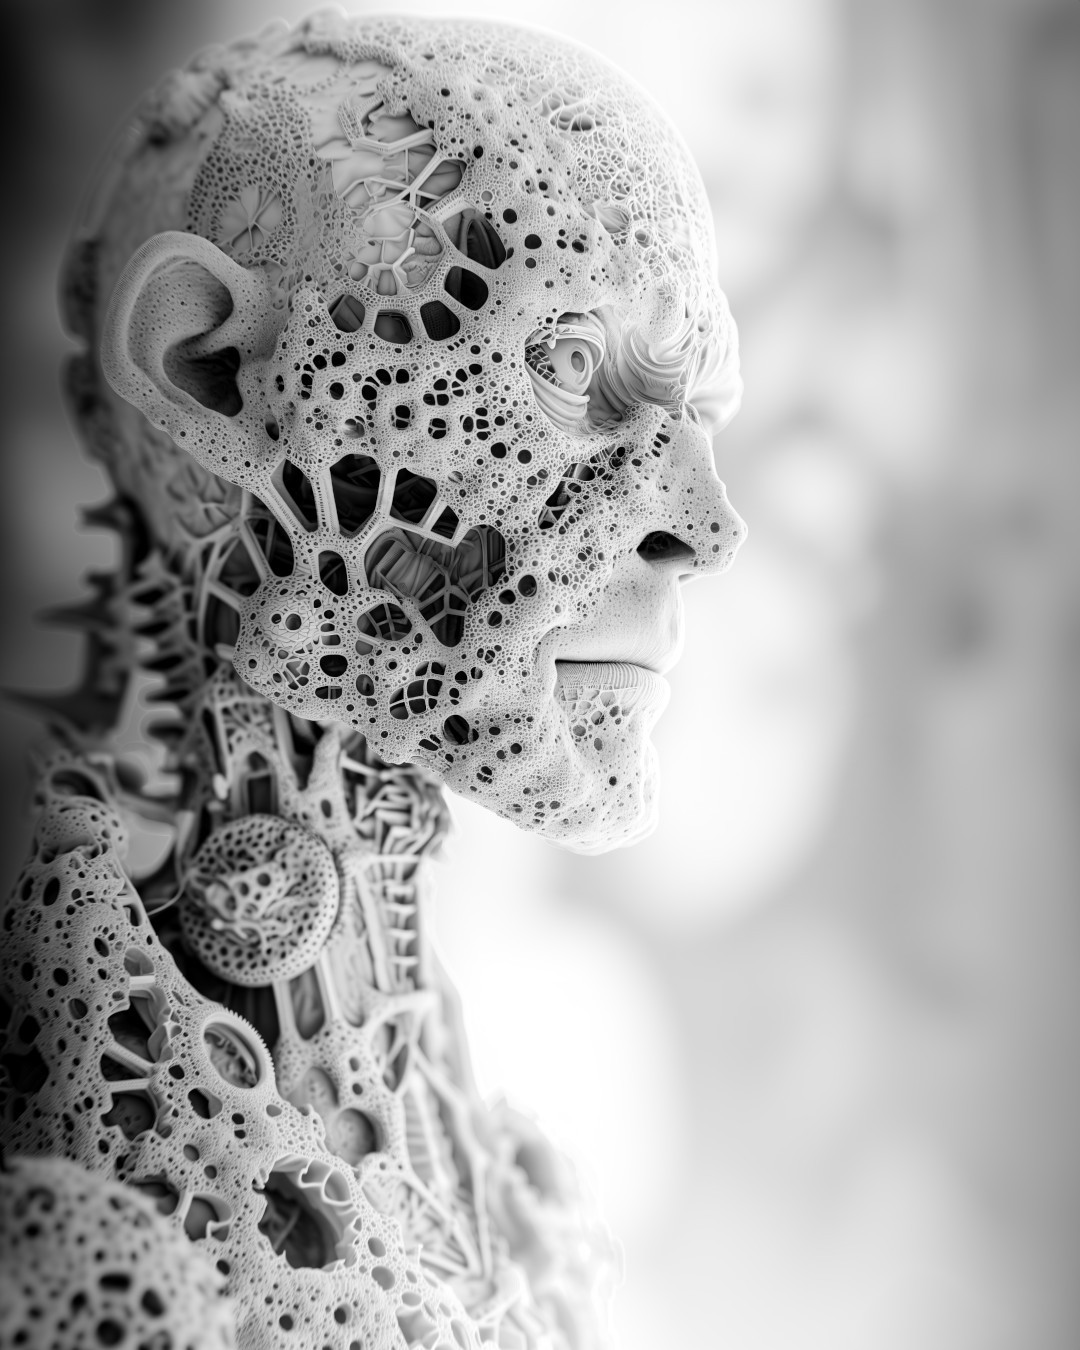 Skeletal structure, intricately detailed patterns, winter snow